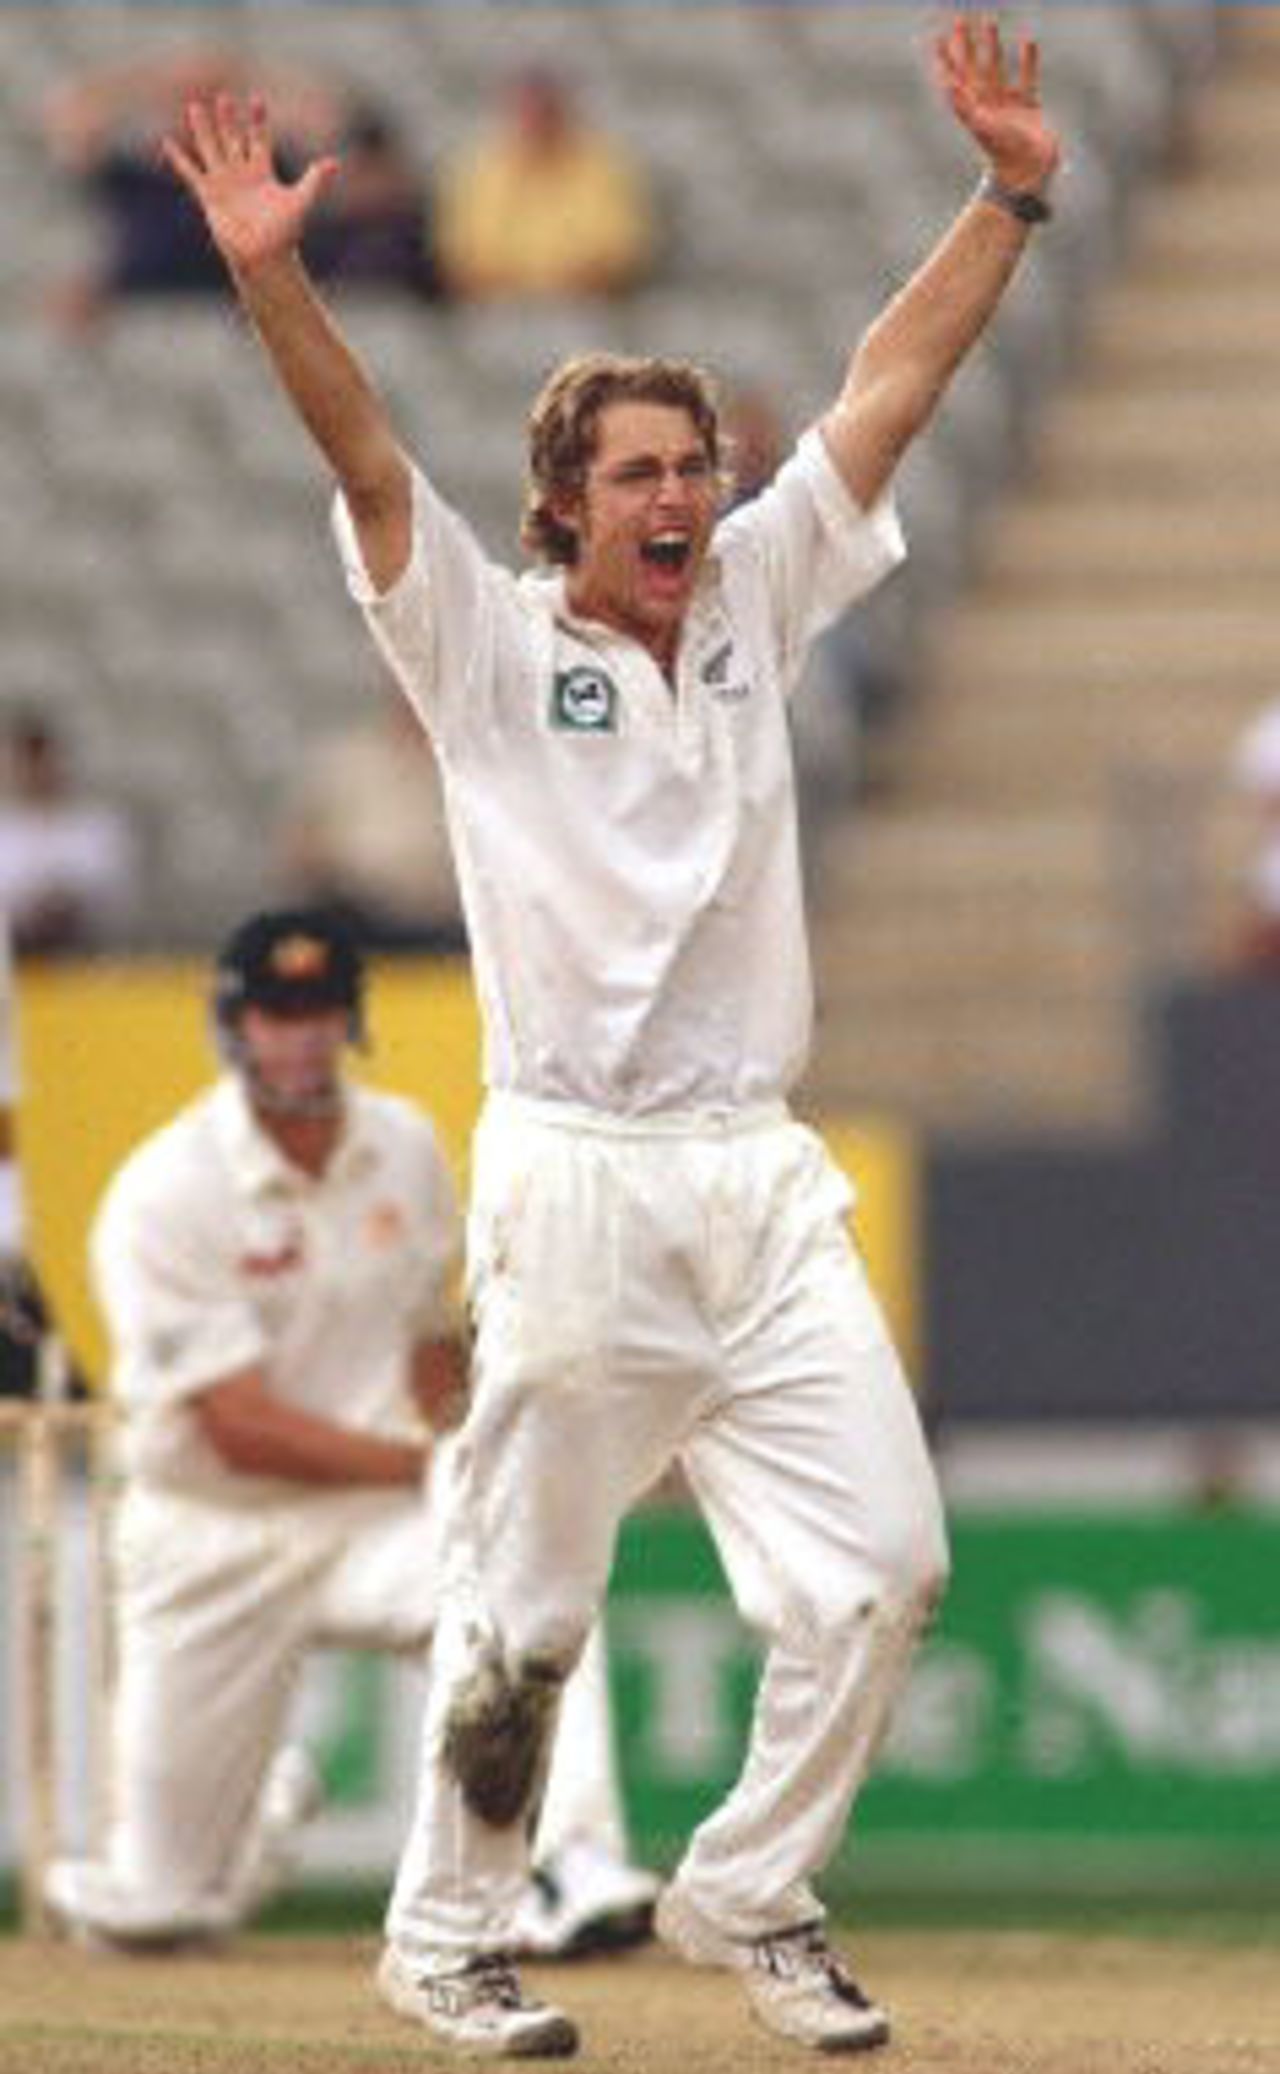 New Zealand spinner Daniel Vettori (R) appeals for an LBW decision against Australian batsman Glenn McGrath (L) on the way to taking 5-62 on the first day of the first Test match being played at Eden Park in Auckland, 11 March 2000. Australia was dismissed for 214 in their first innings and in reply New Zealand is in trouble at 26-4 at stumps.